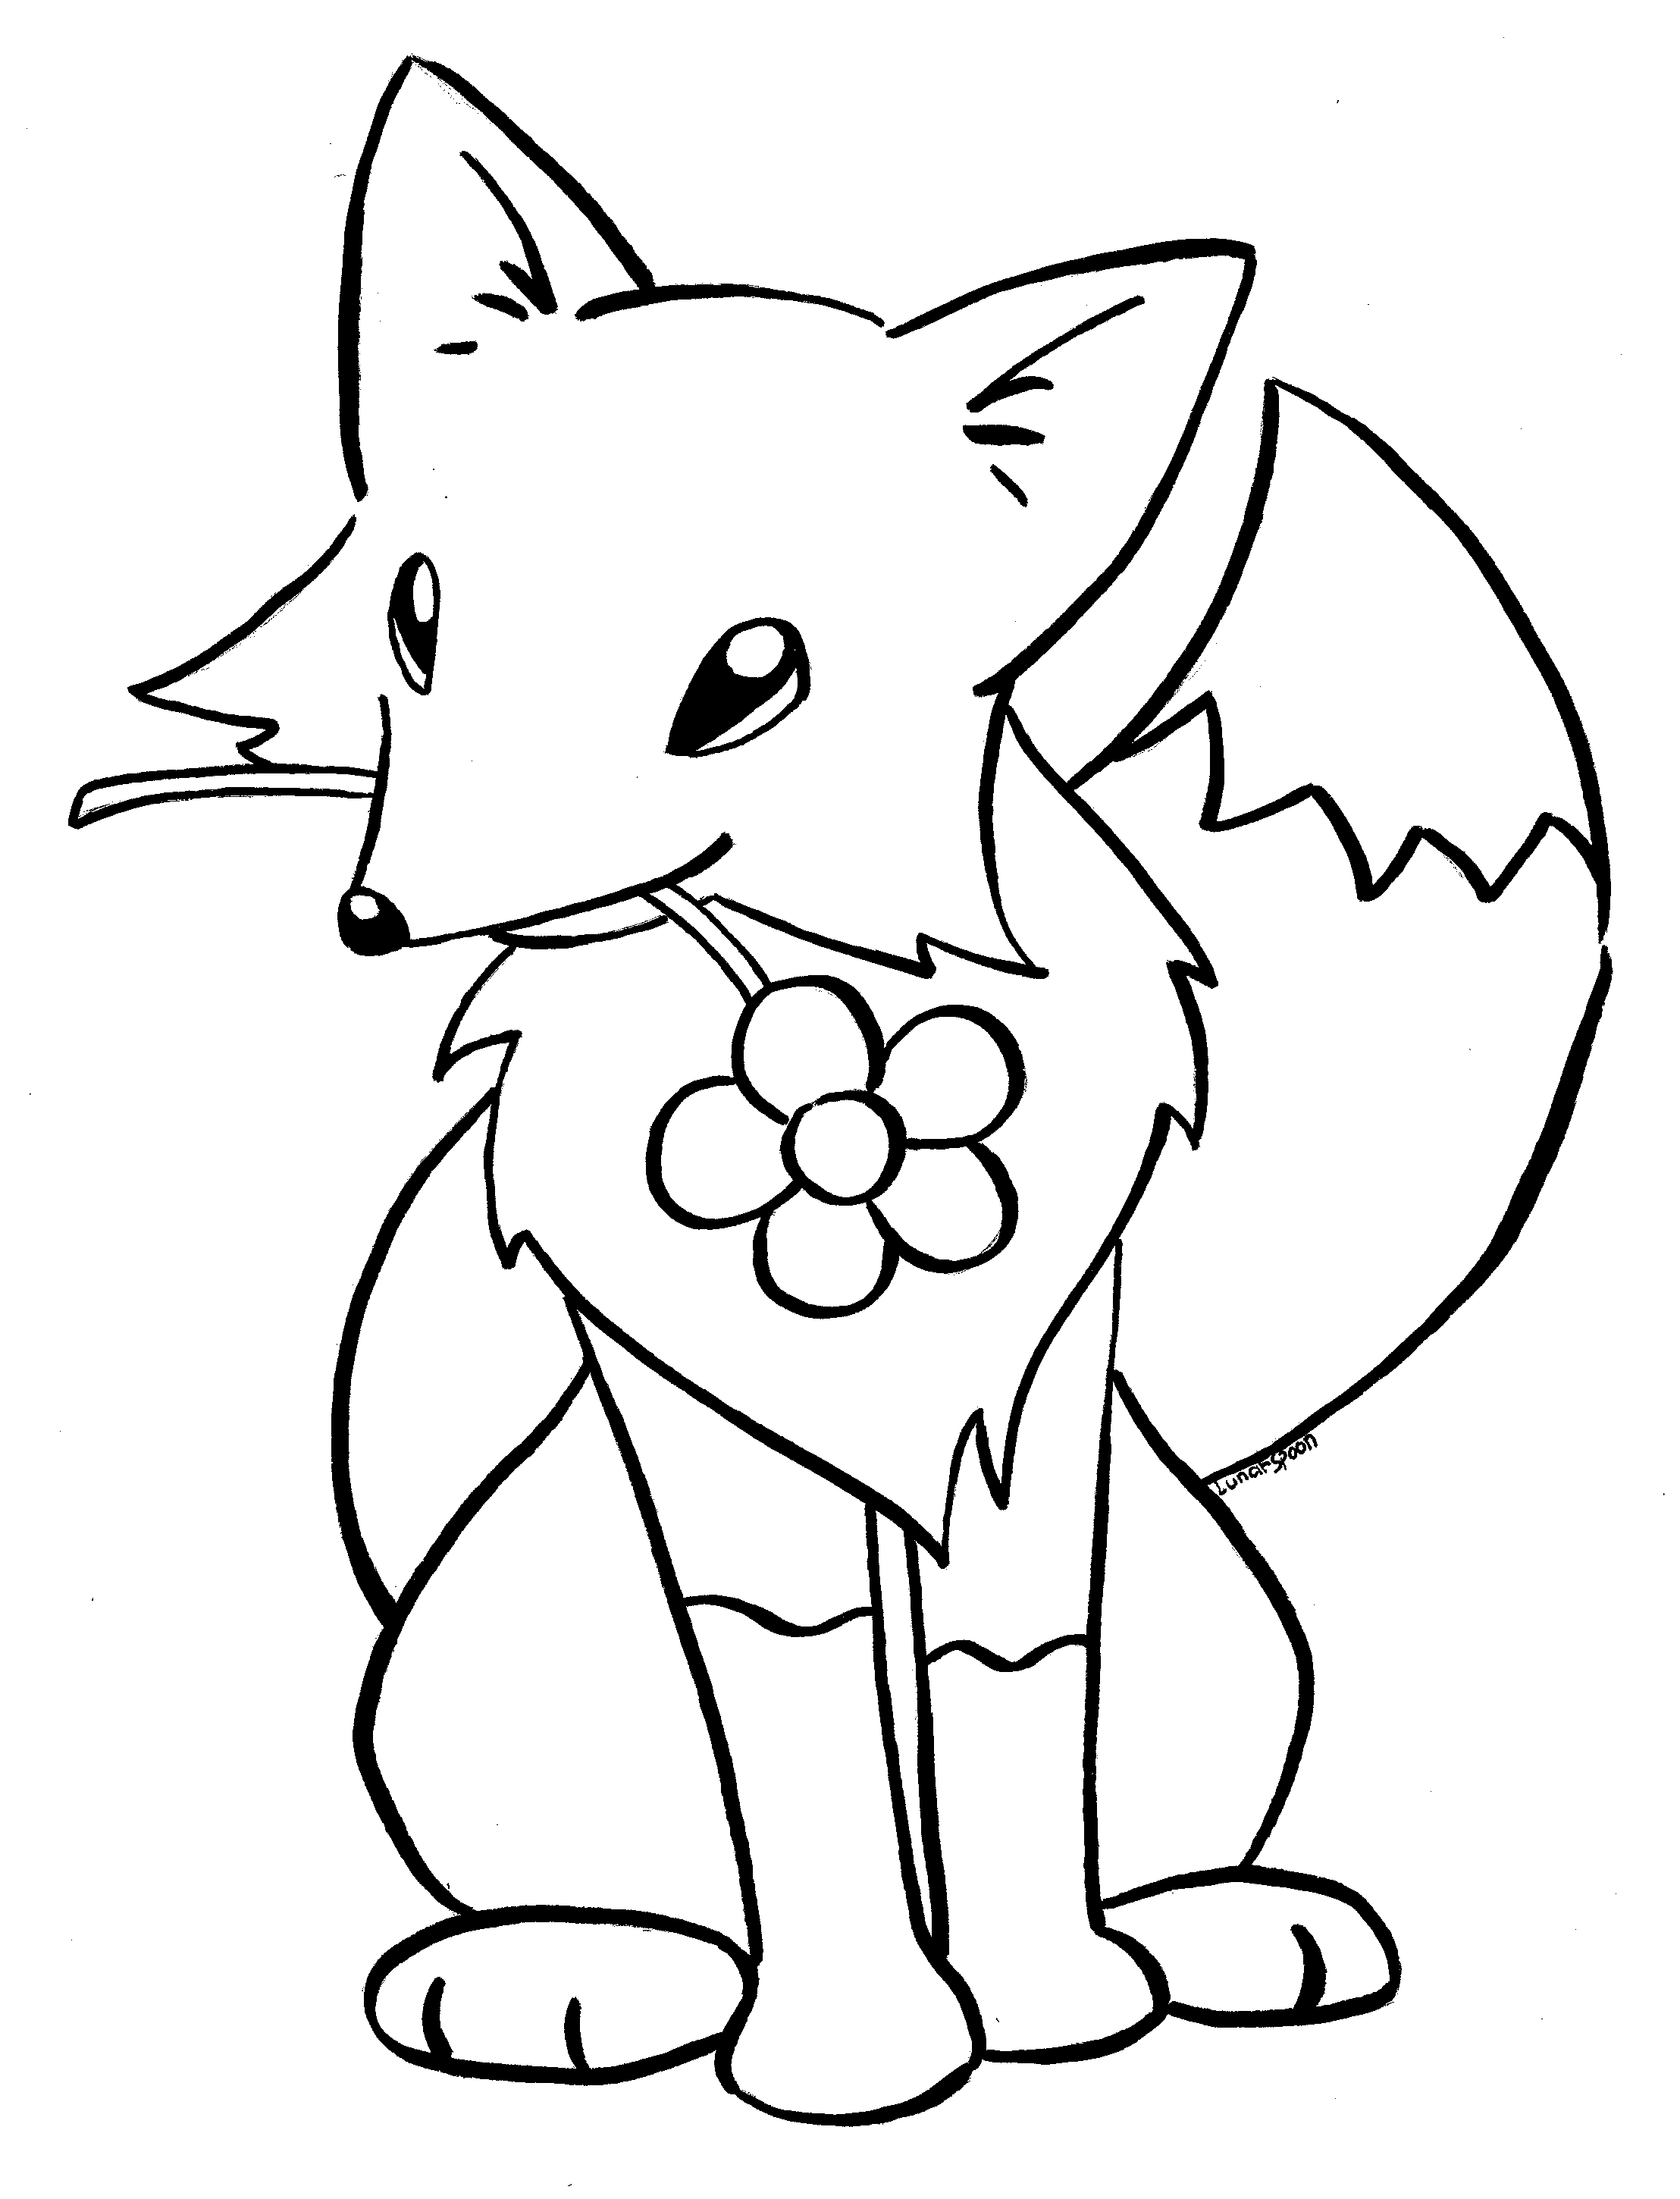 Stone Fox Coloring Pages | Cooloring.com